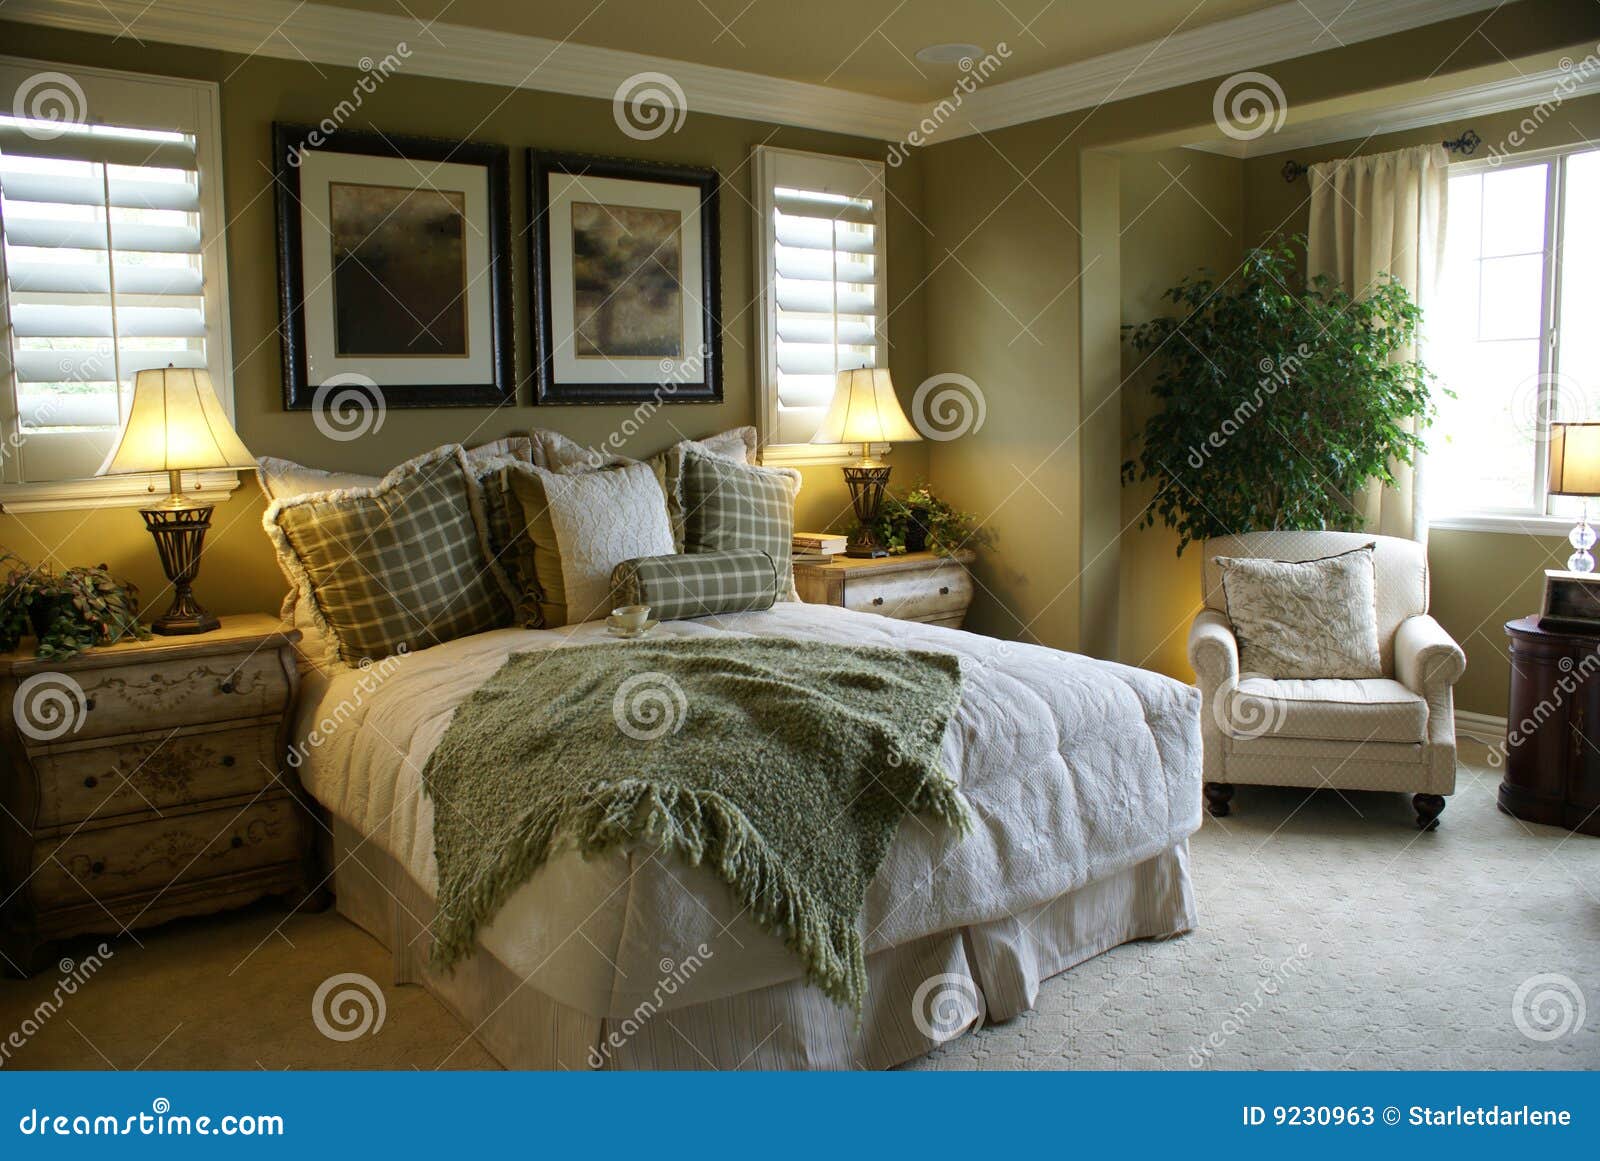 beautiful master bed room